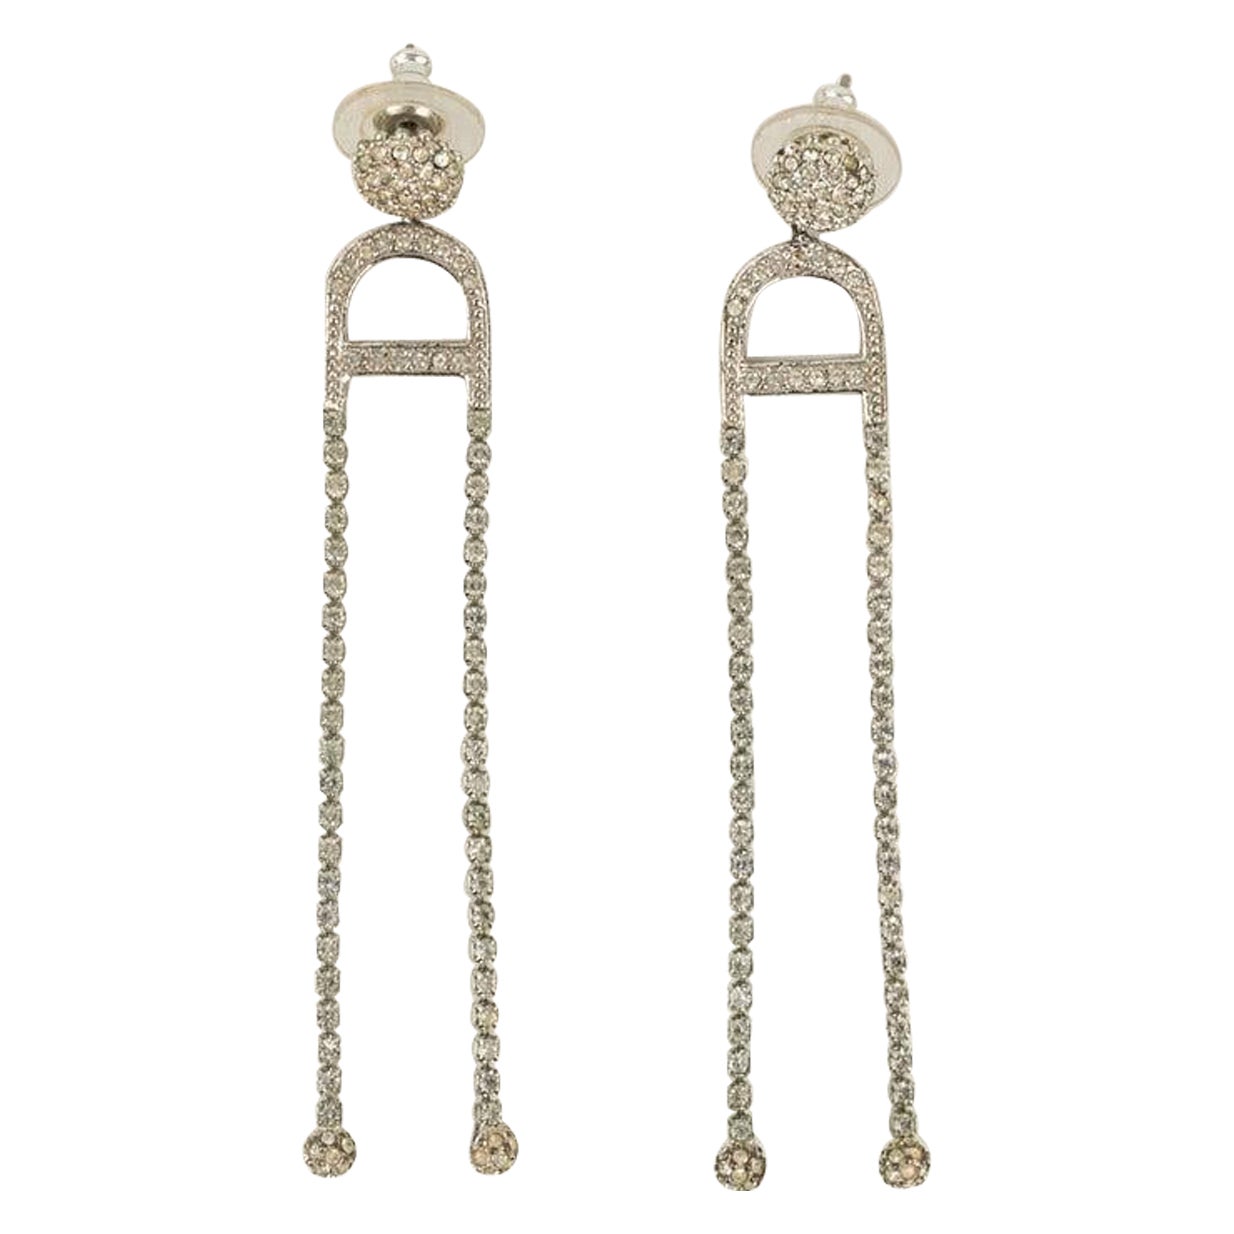 Christian Dior Earrings in Silvery Metal with Swarovski Rhinestones For Sale